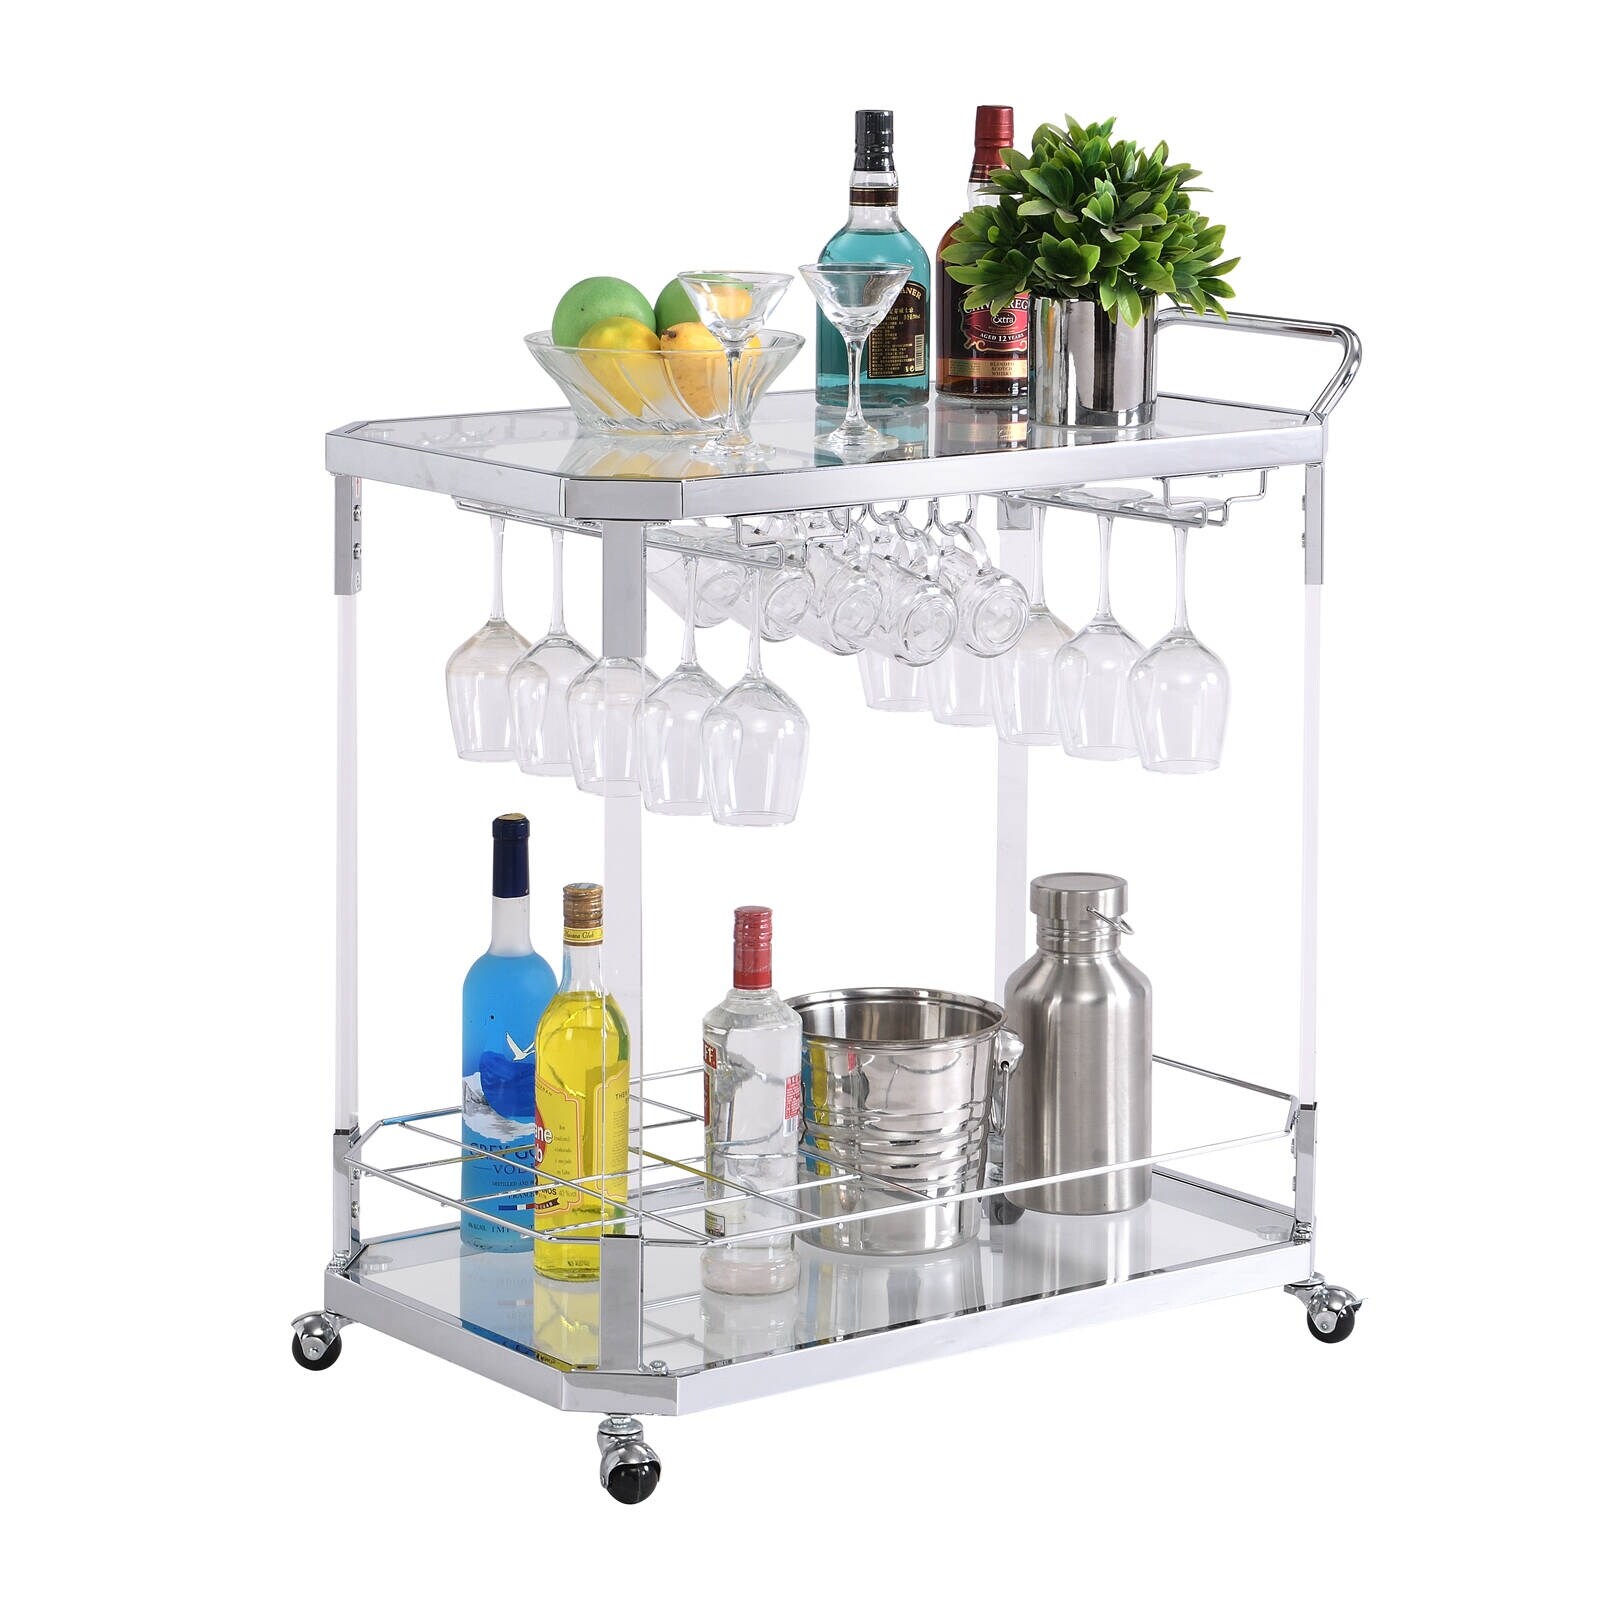 https://ak1.ostkcdn.com/images/products/is/images/direct/4ab0790ce535f1dcee259b591f0078ecd242f1e2/Hausfame-Home-Bars-Cart-Glass-Metal-Chrome-Clear-Modern-Wine-Rack.jpg